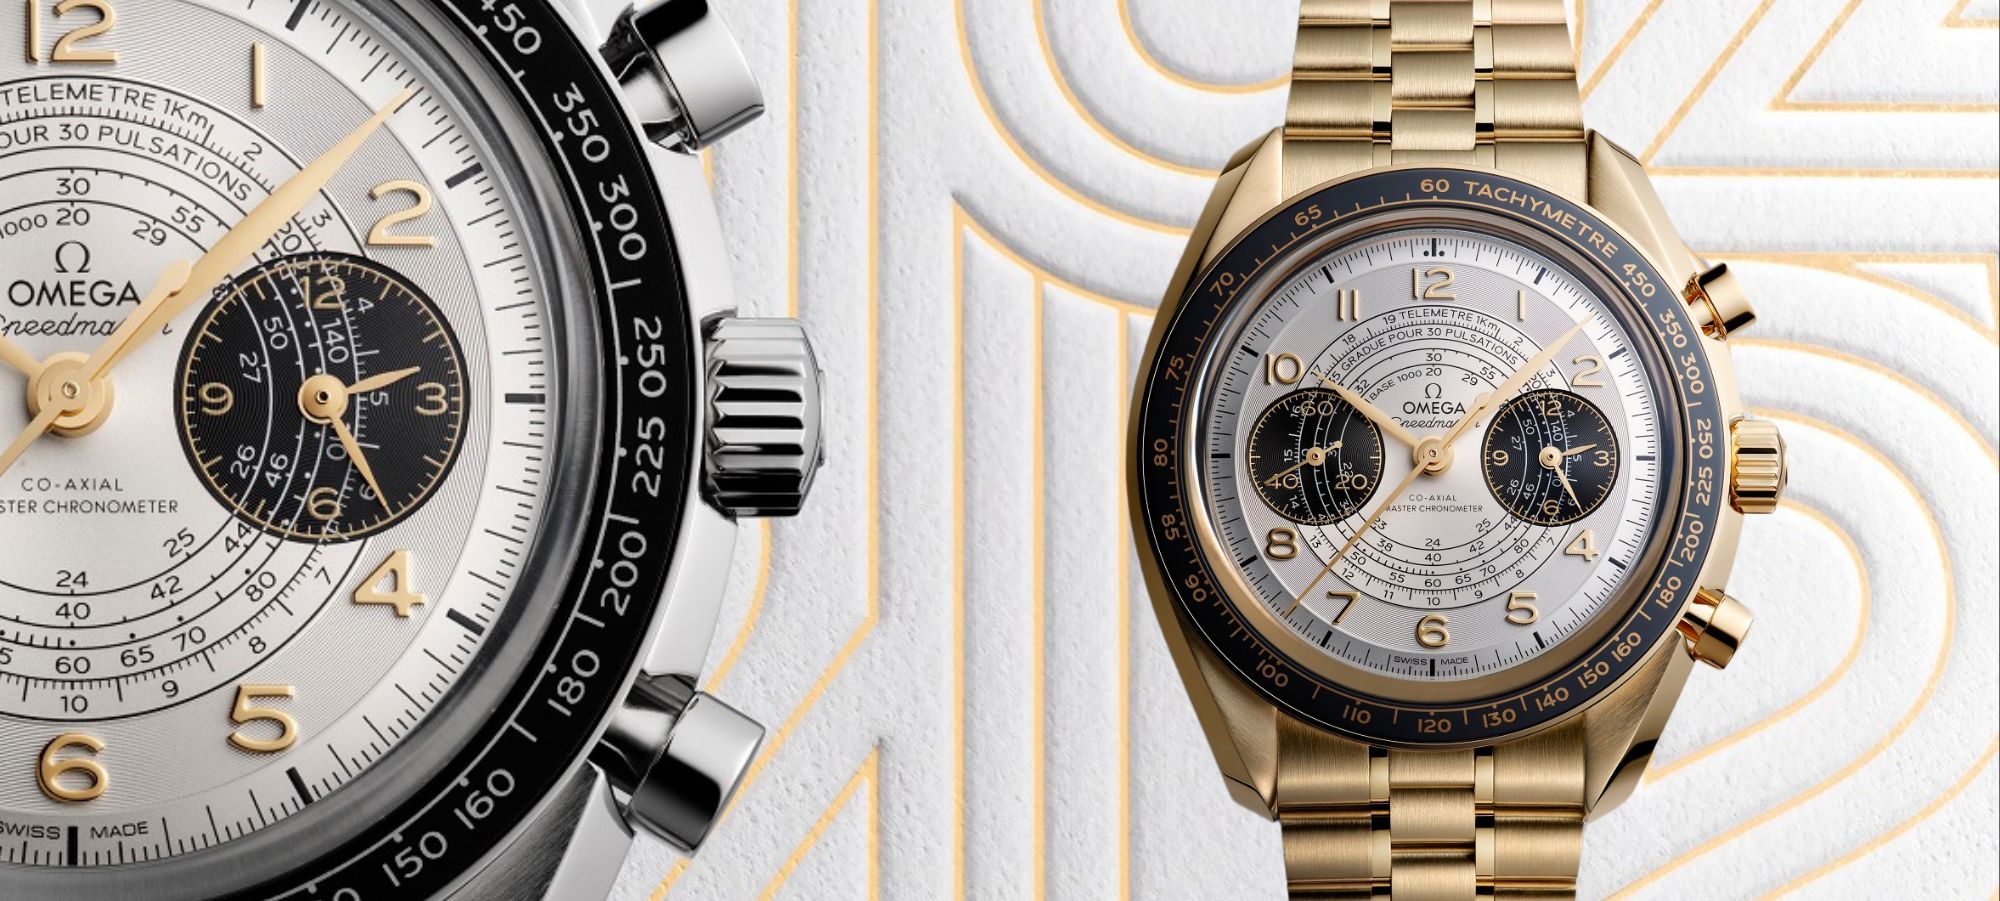 New Release: Omega Introduces New Speedmaster Chronoscope Watches For Paris 2024 Olympics | aBlogtoWatch